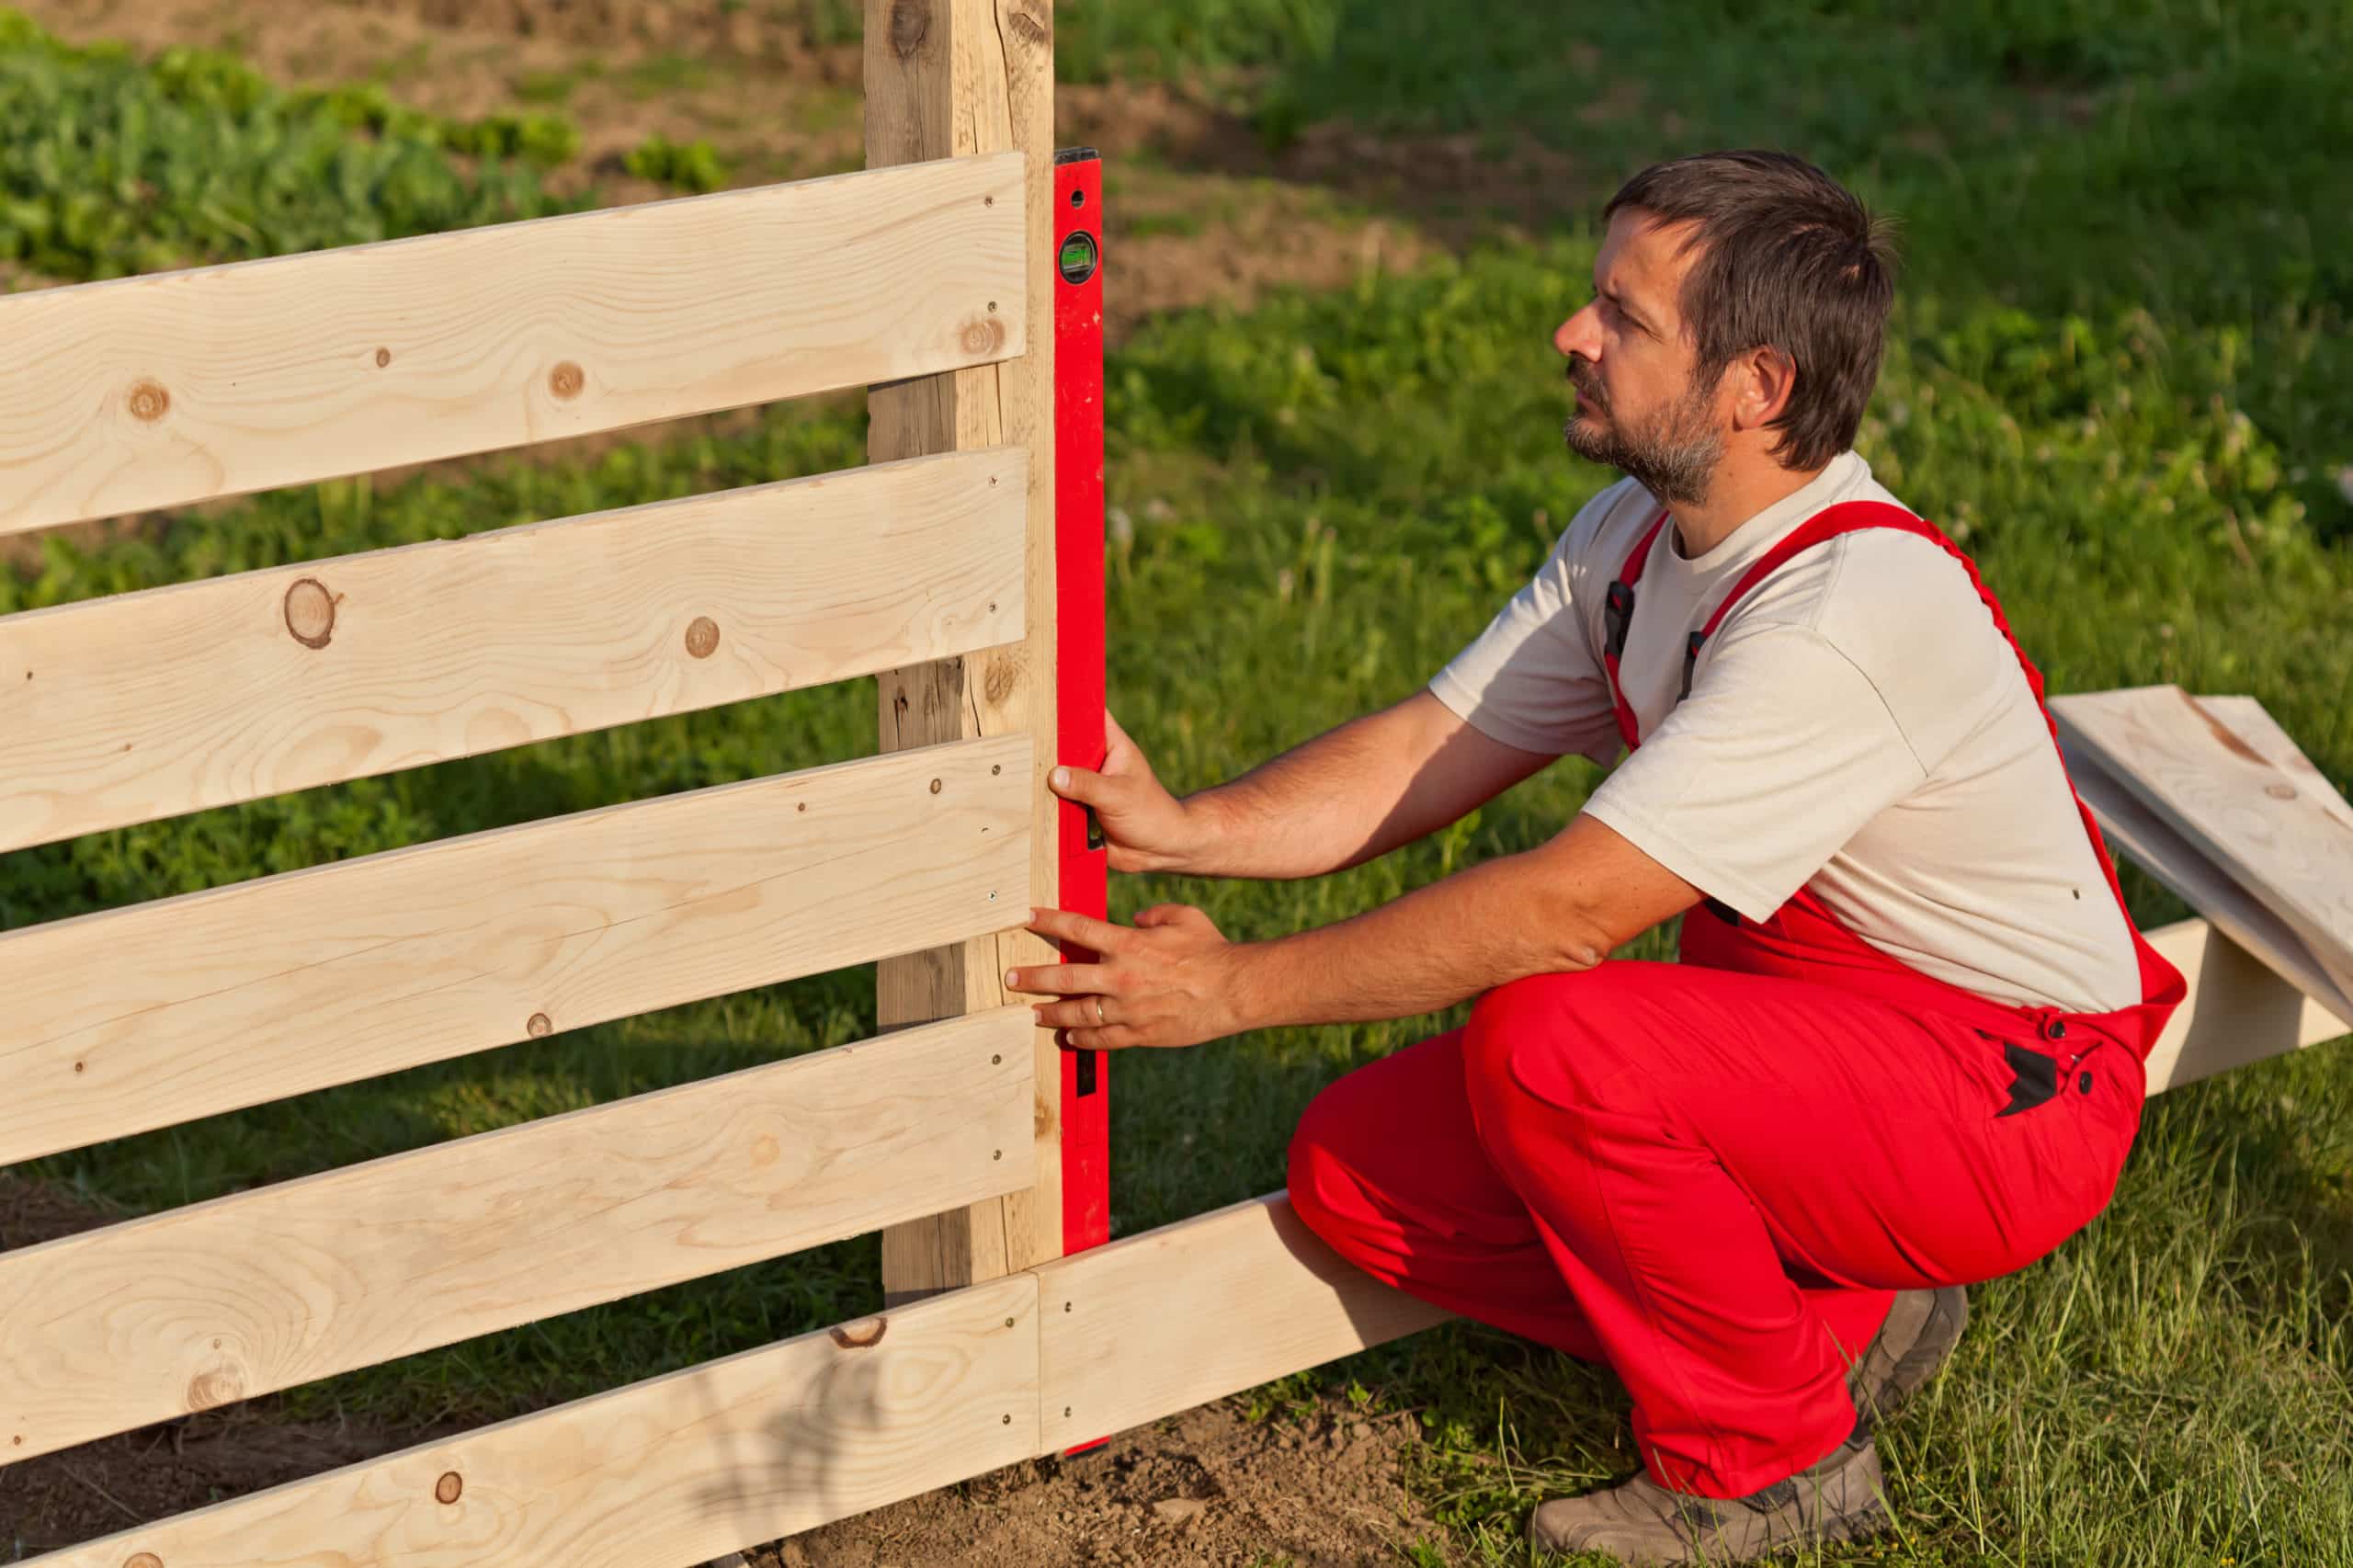 A fencing and decking business contractor in red overalls uses a level to make sure his fence is square.